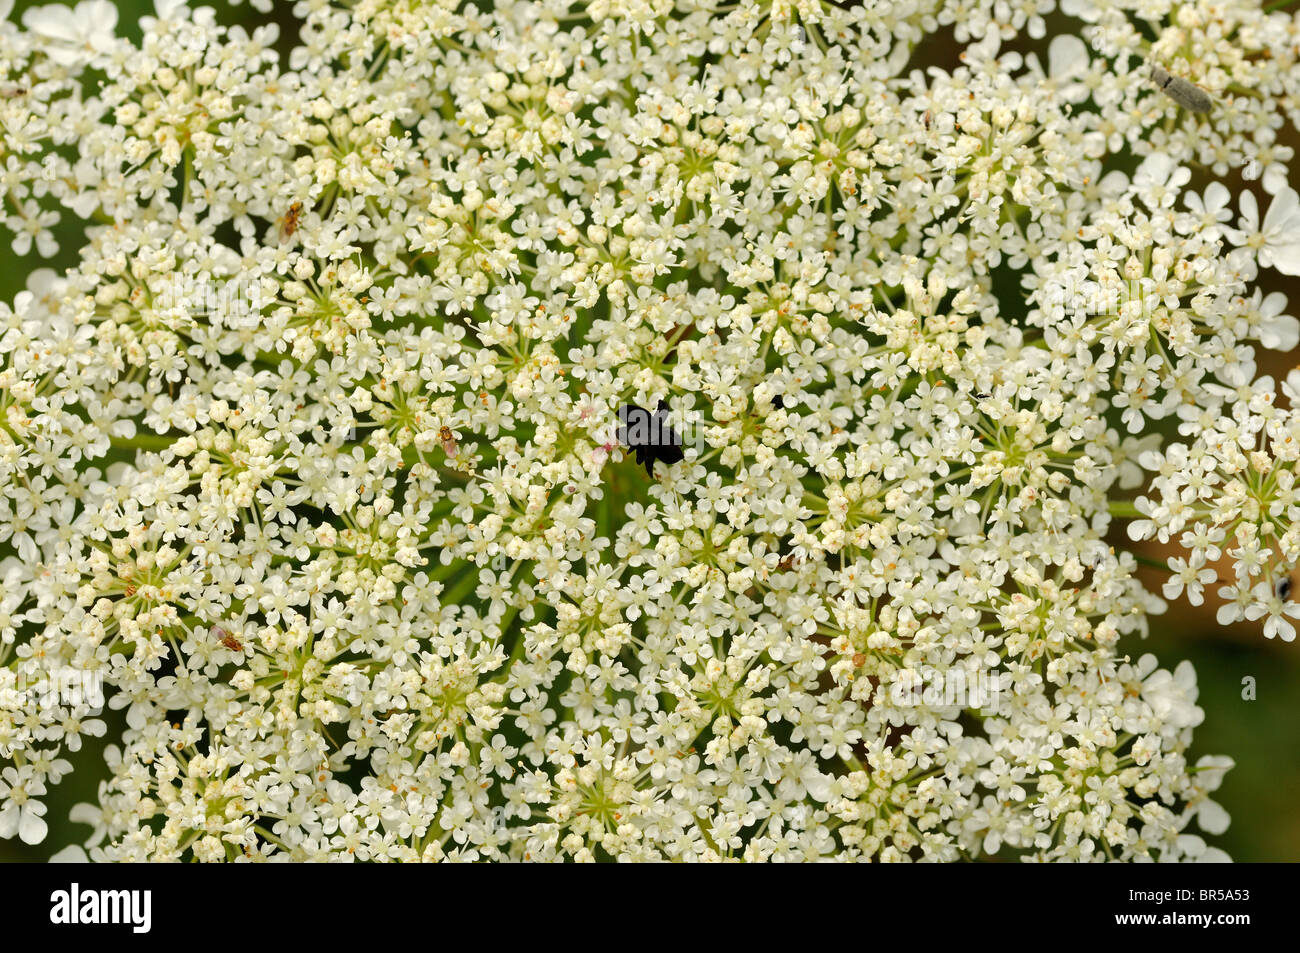 Flower umbel of Wild Carrot, Daucus carota, with a contrasting black flower in the centre that serves to attract insects Stock Photo